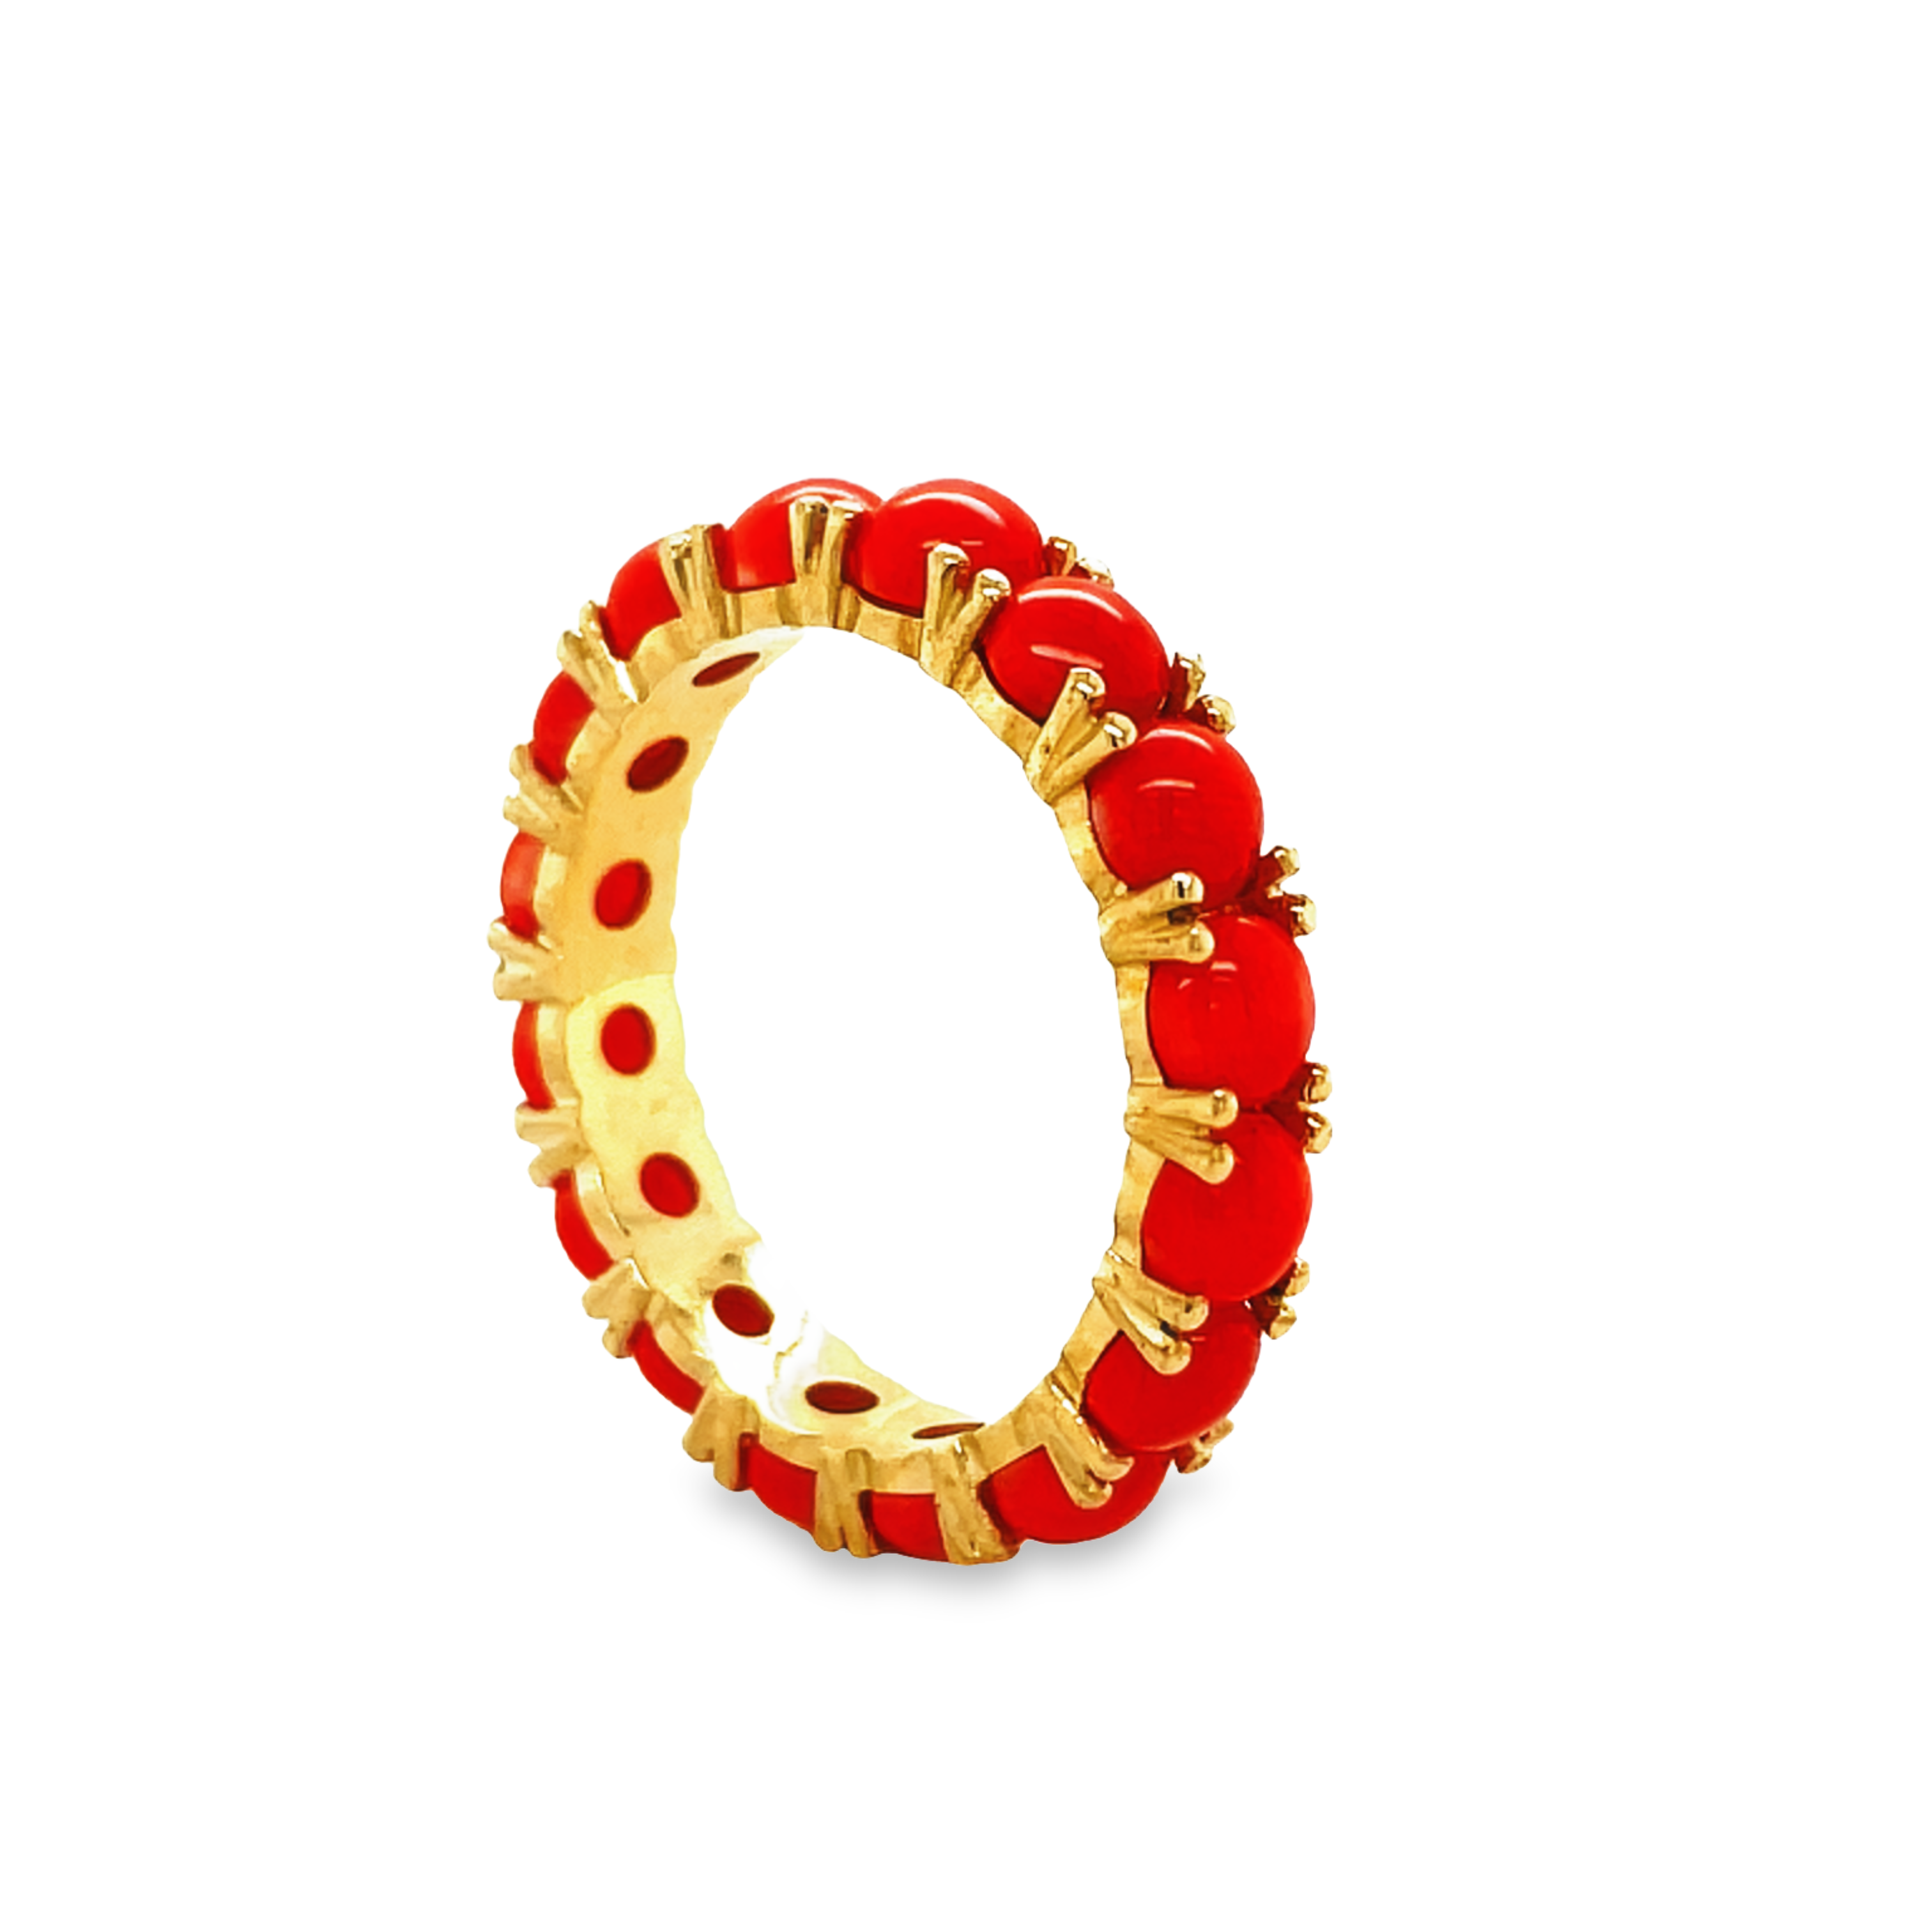 This beautiful coral bead ring is crafted in 14k yellow gold and is 4.00 mm wide. With an easy to stack design, it is perfect for any occasion. Size 8.